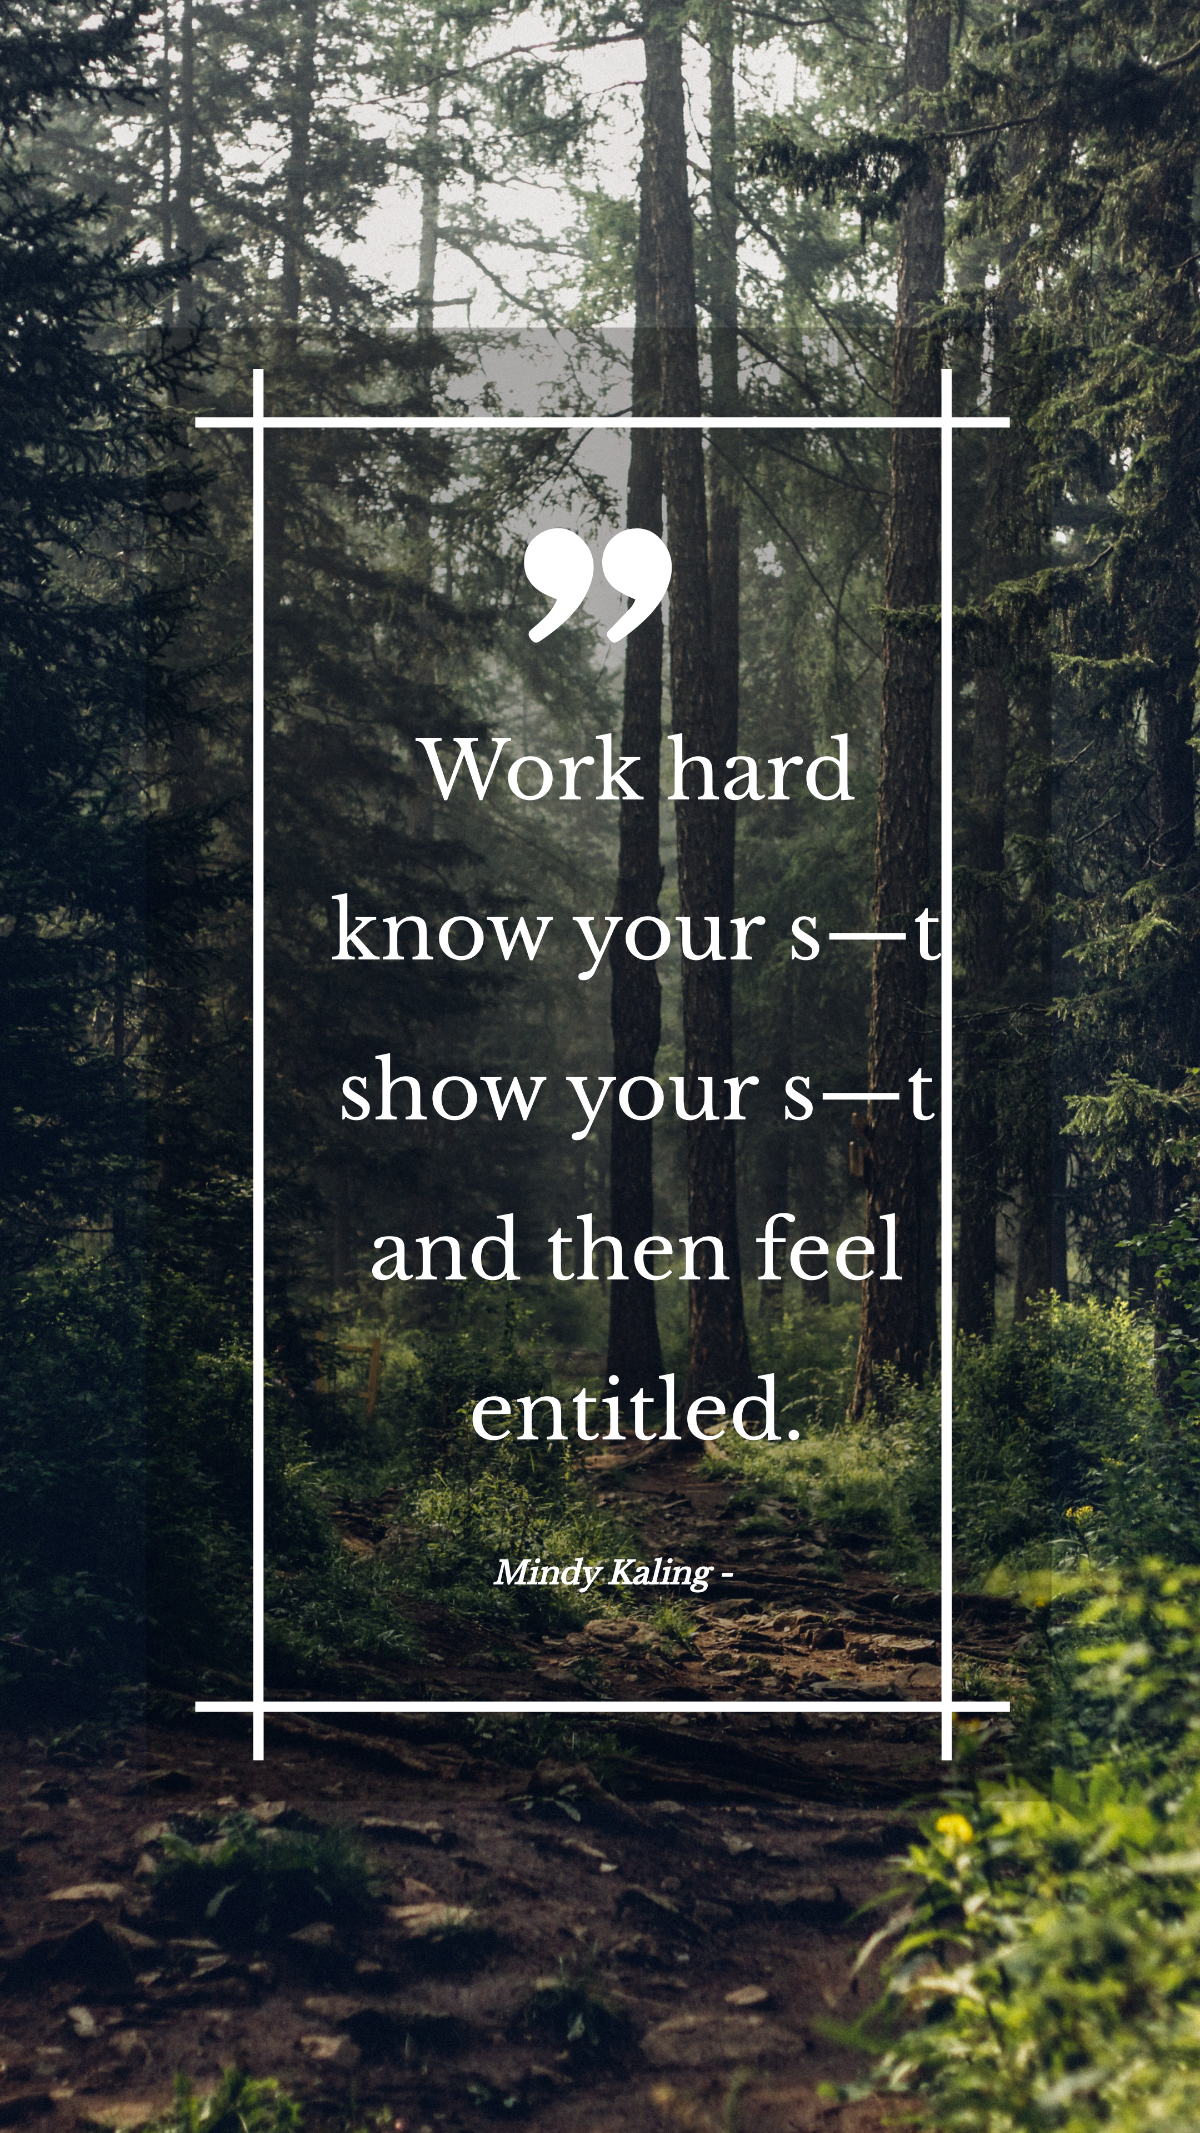 Mindy Kaling - Work hard know your s—t show your s—t and then feel entitled. Template